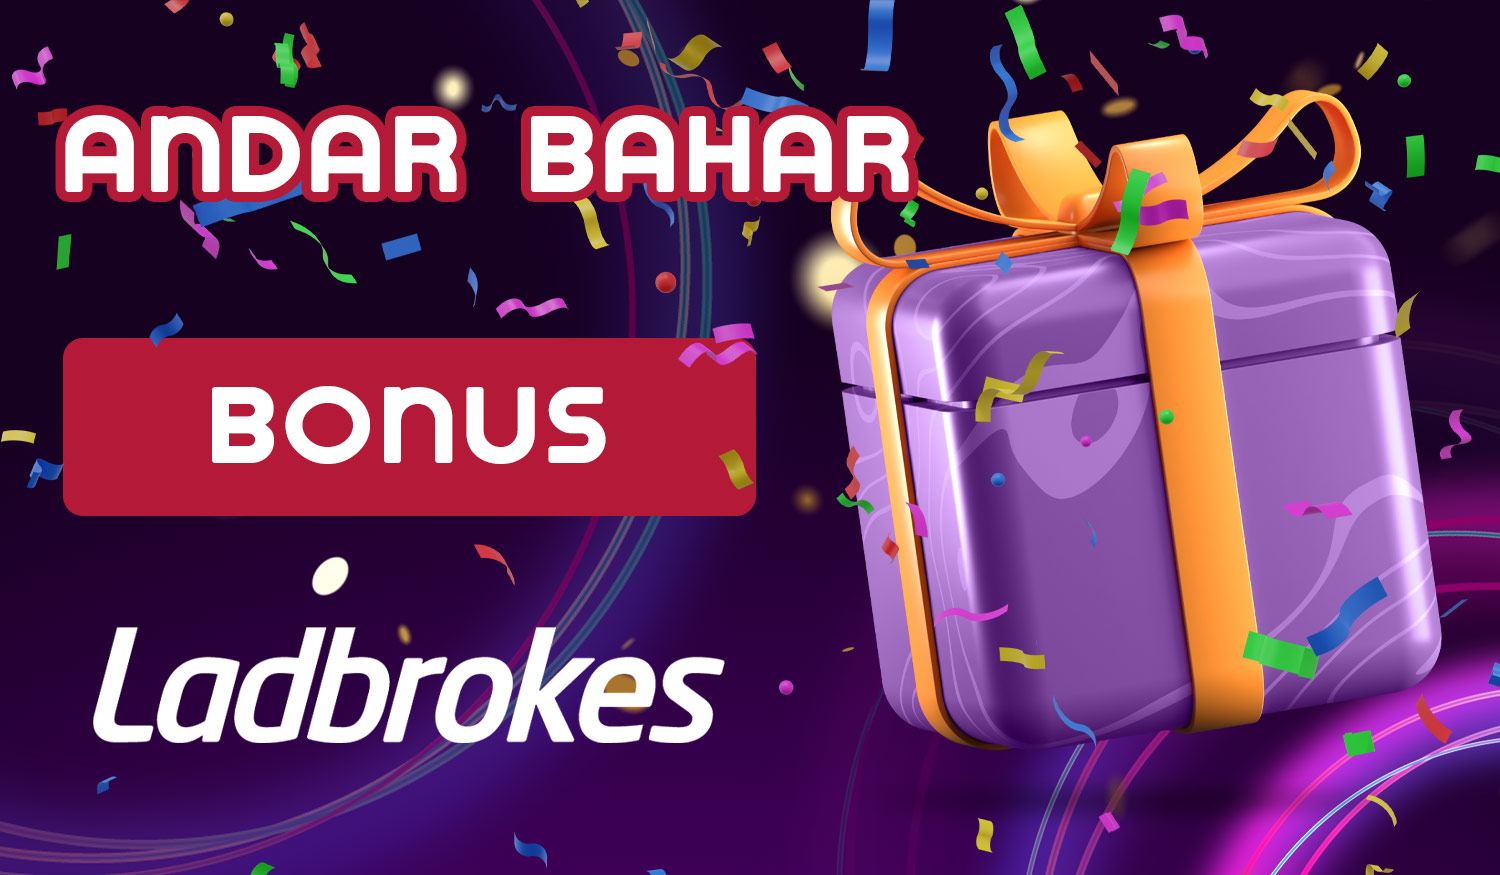 Ladbrokes India provides an array of enticing bonuses and promotions to elevate your gaming experience